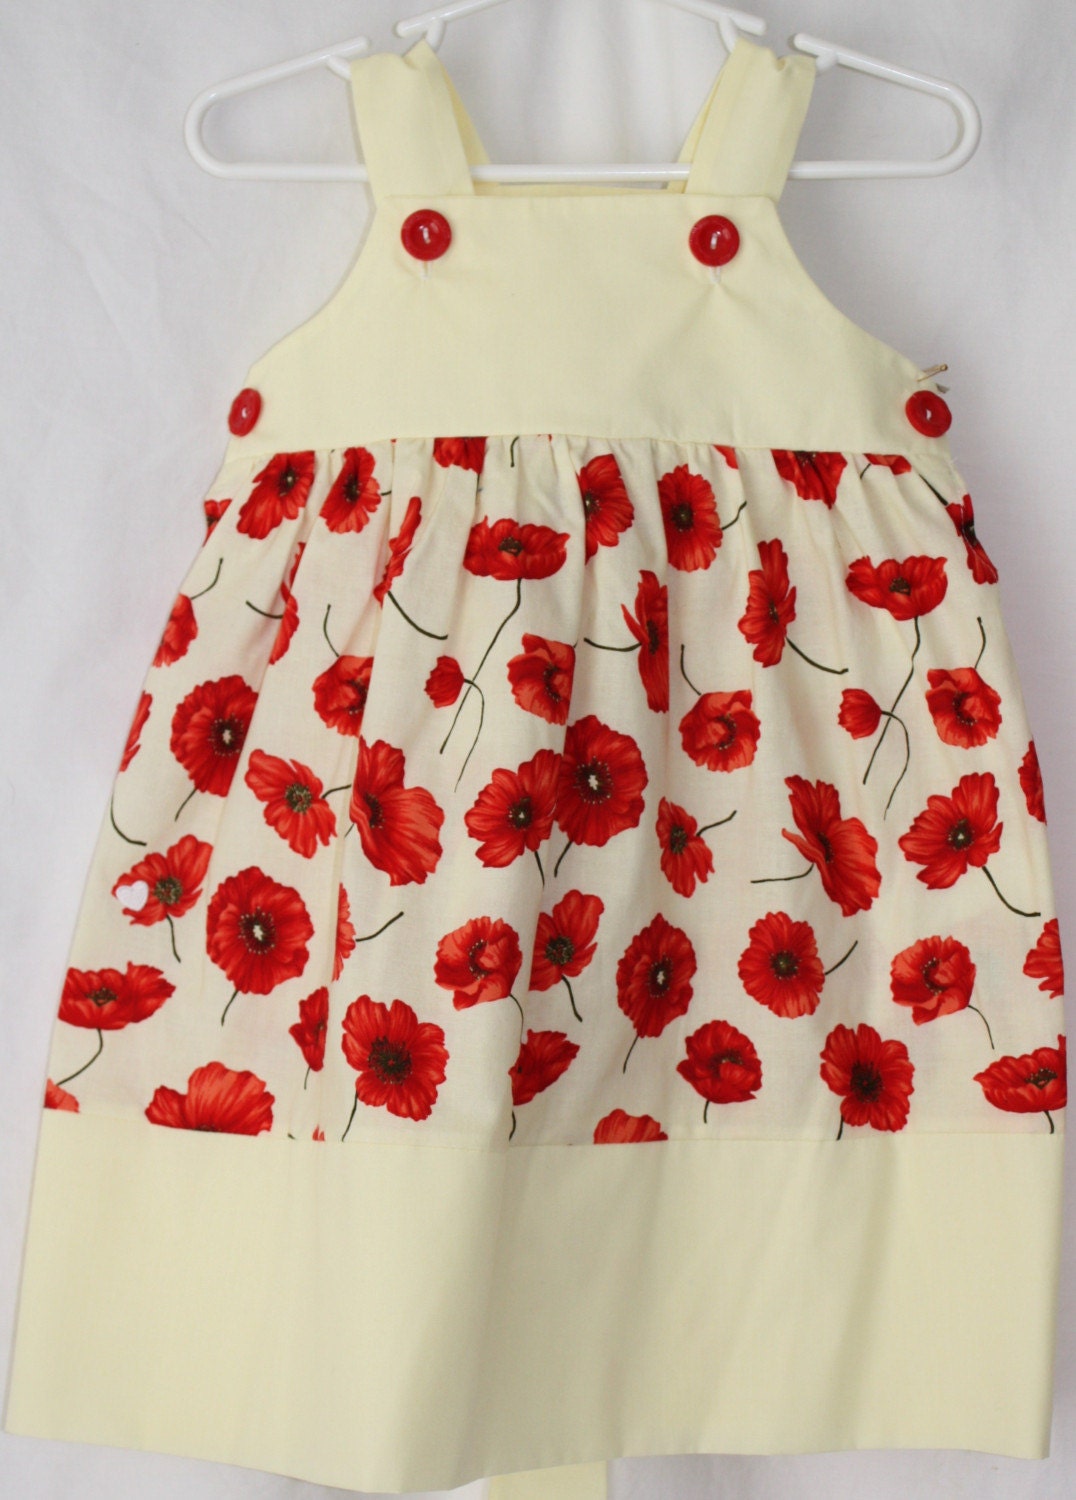 Red and yellow poppy dress, 4T